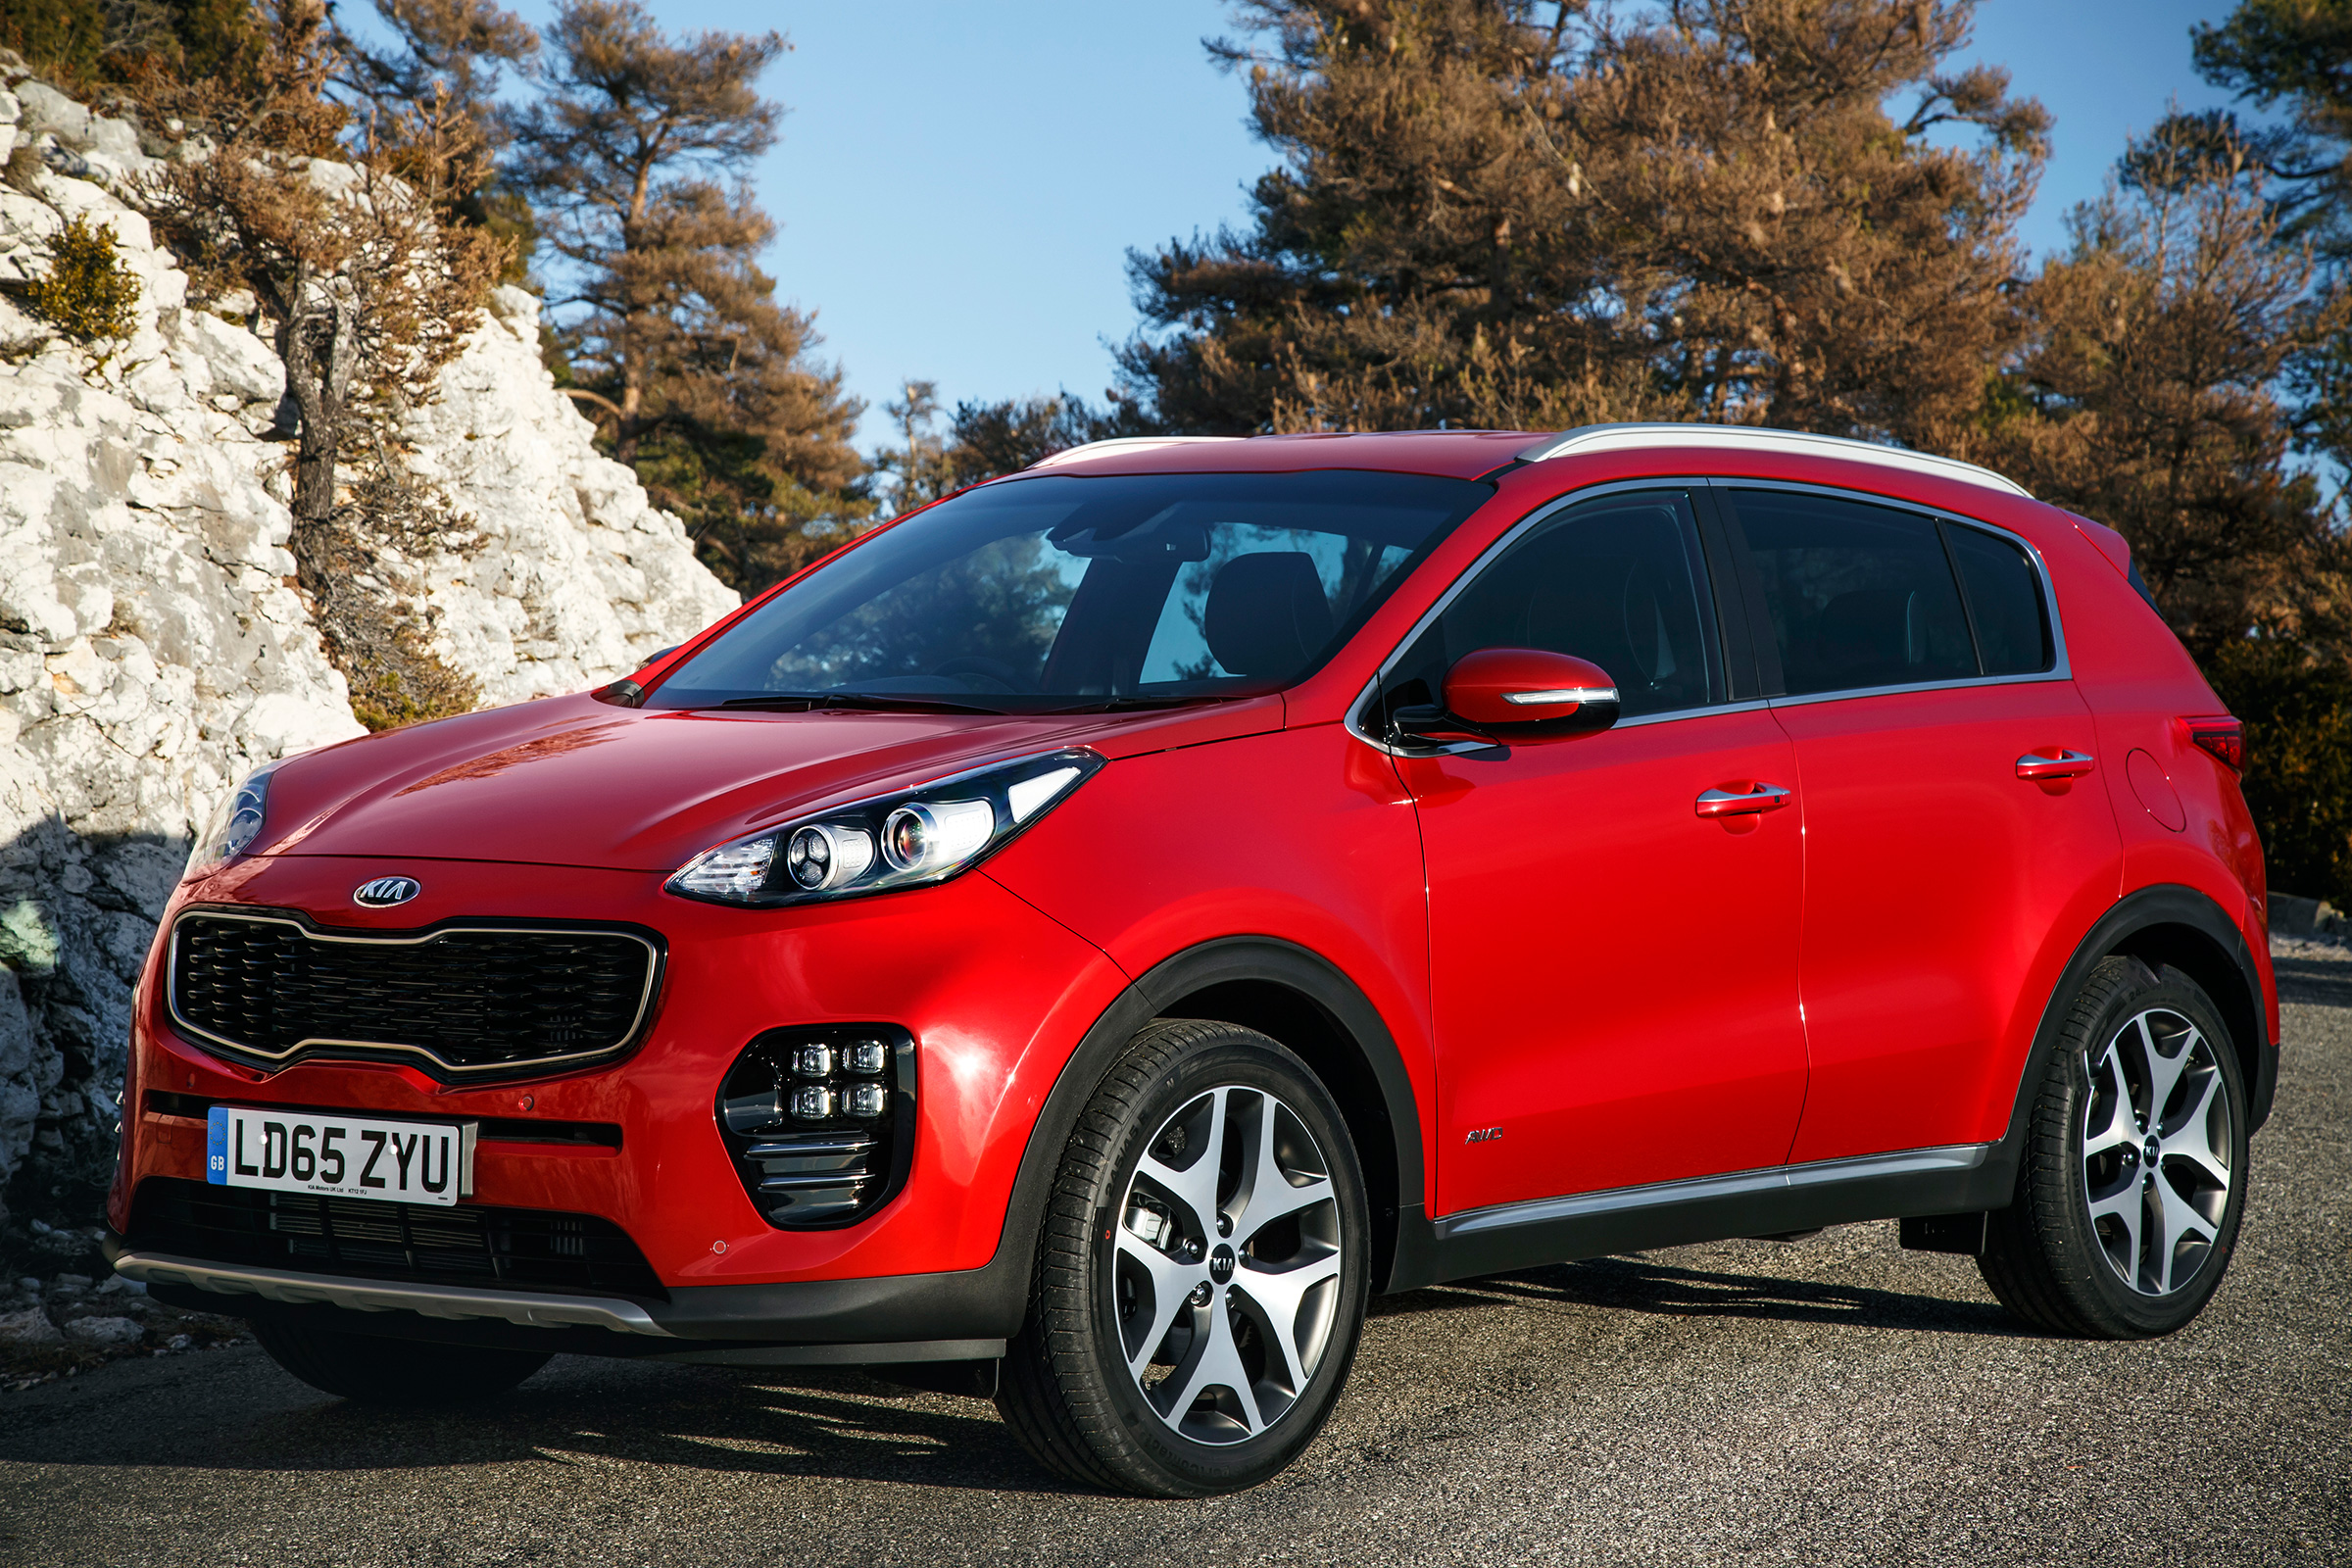 New Kia Sportage SUV pictures Carbuyer